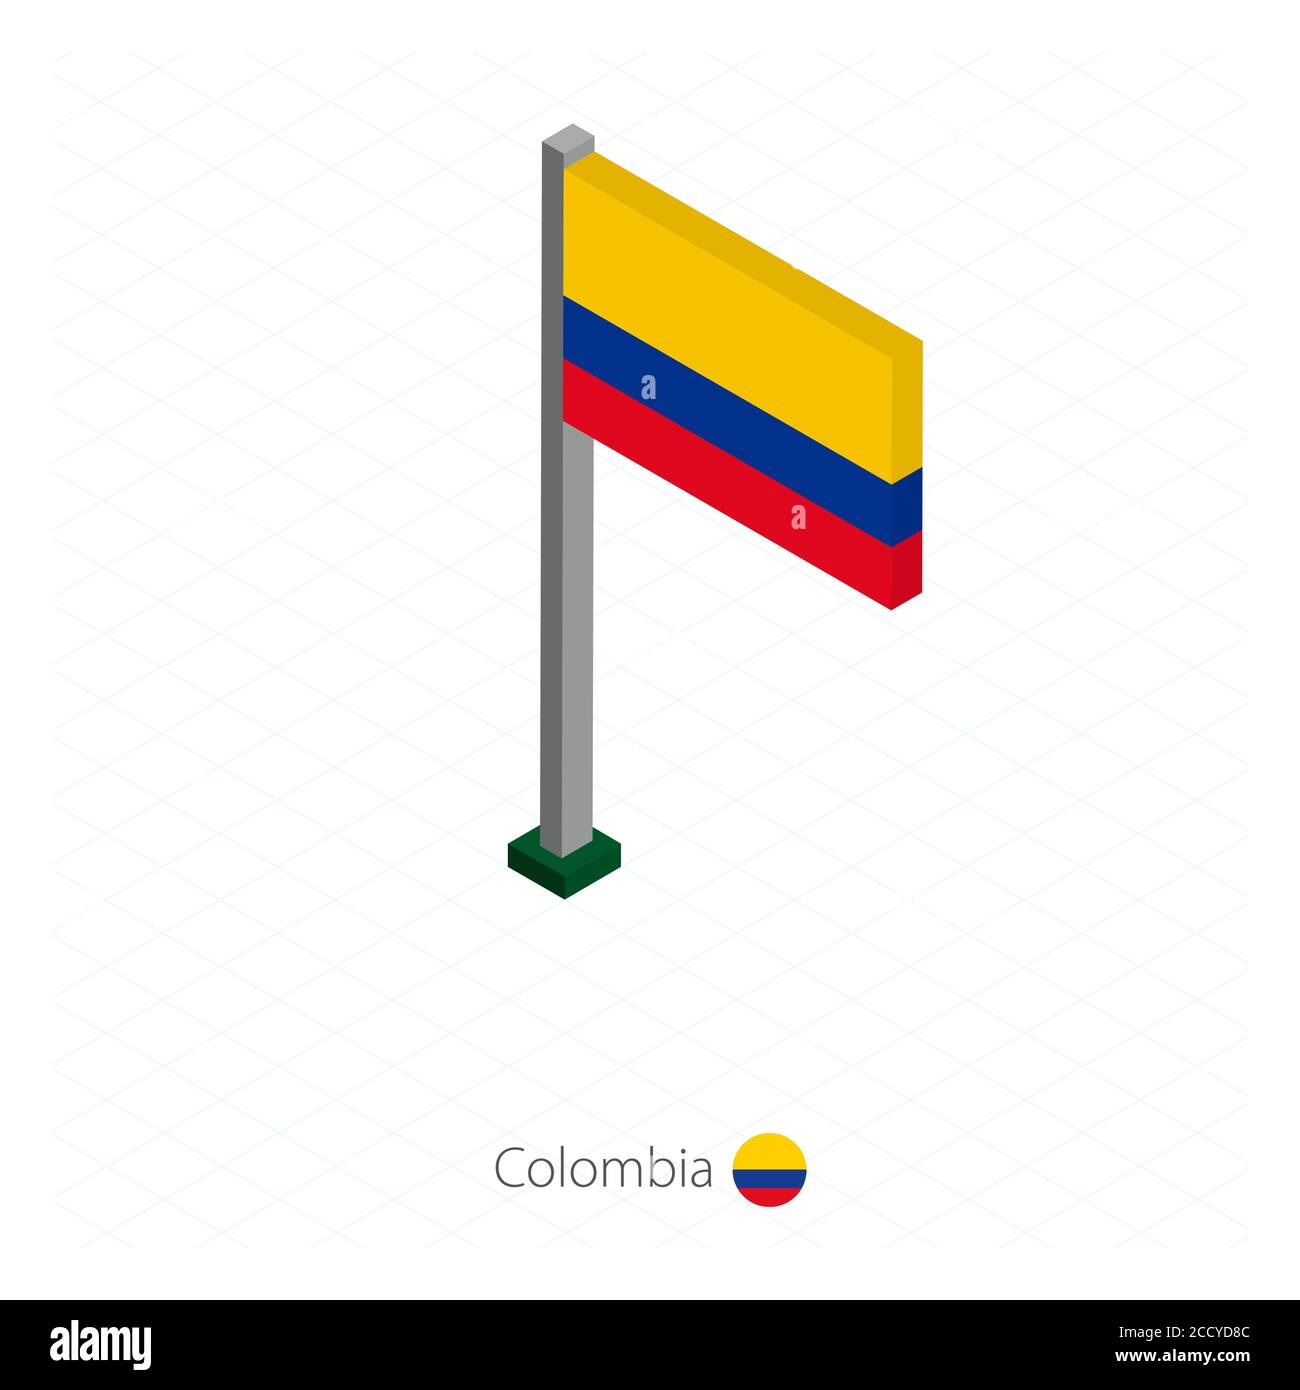 Colombia Flag on Flagpole in Isometric dimension. Isometric blue background. Vector illustration. Stock Vector